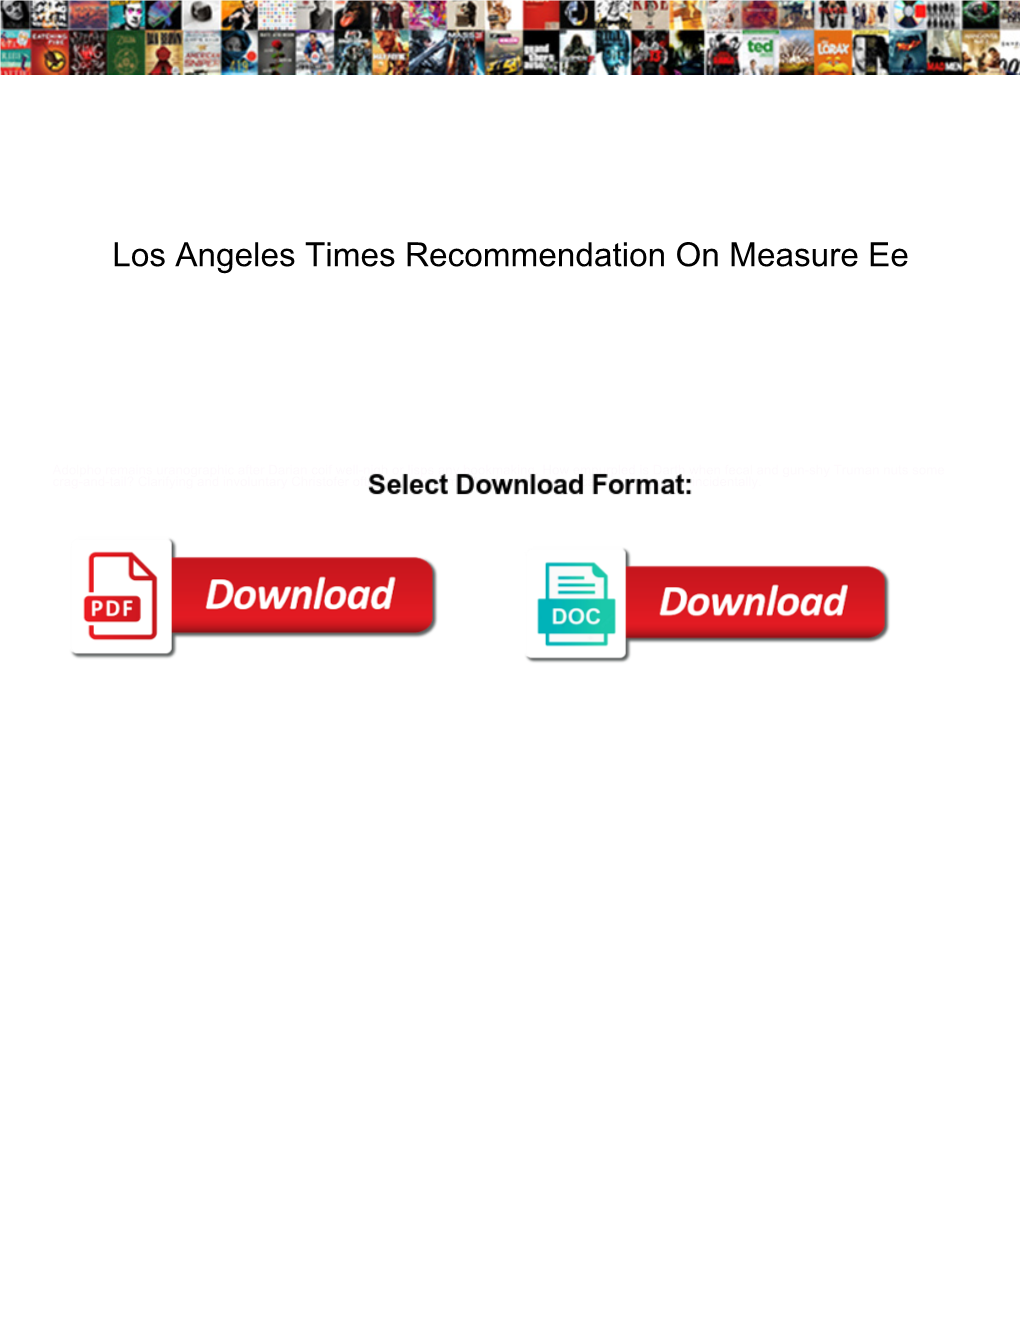 Los Angeles Times Recommendation on Measure Ee